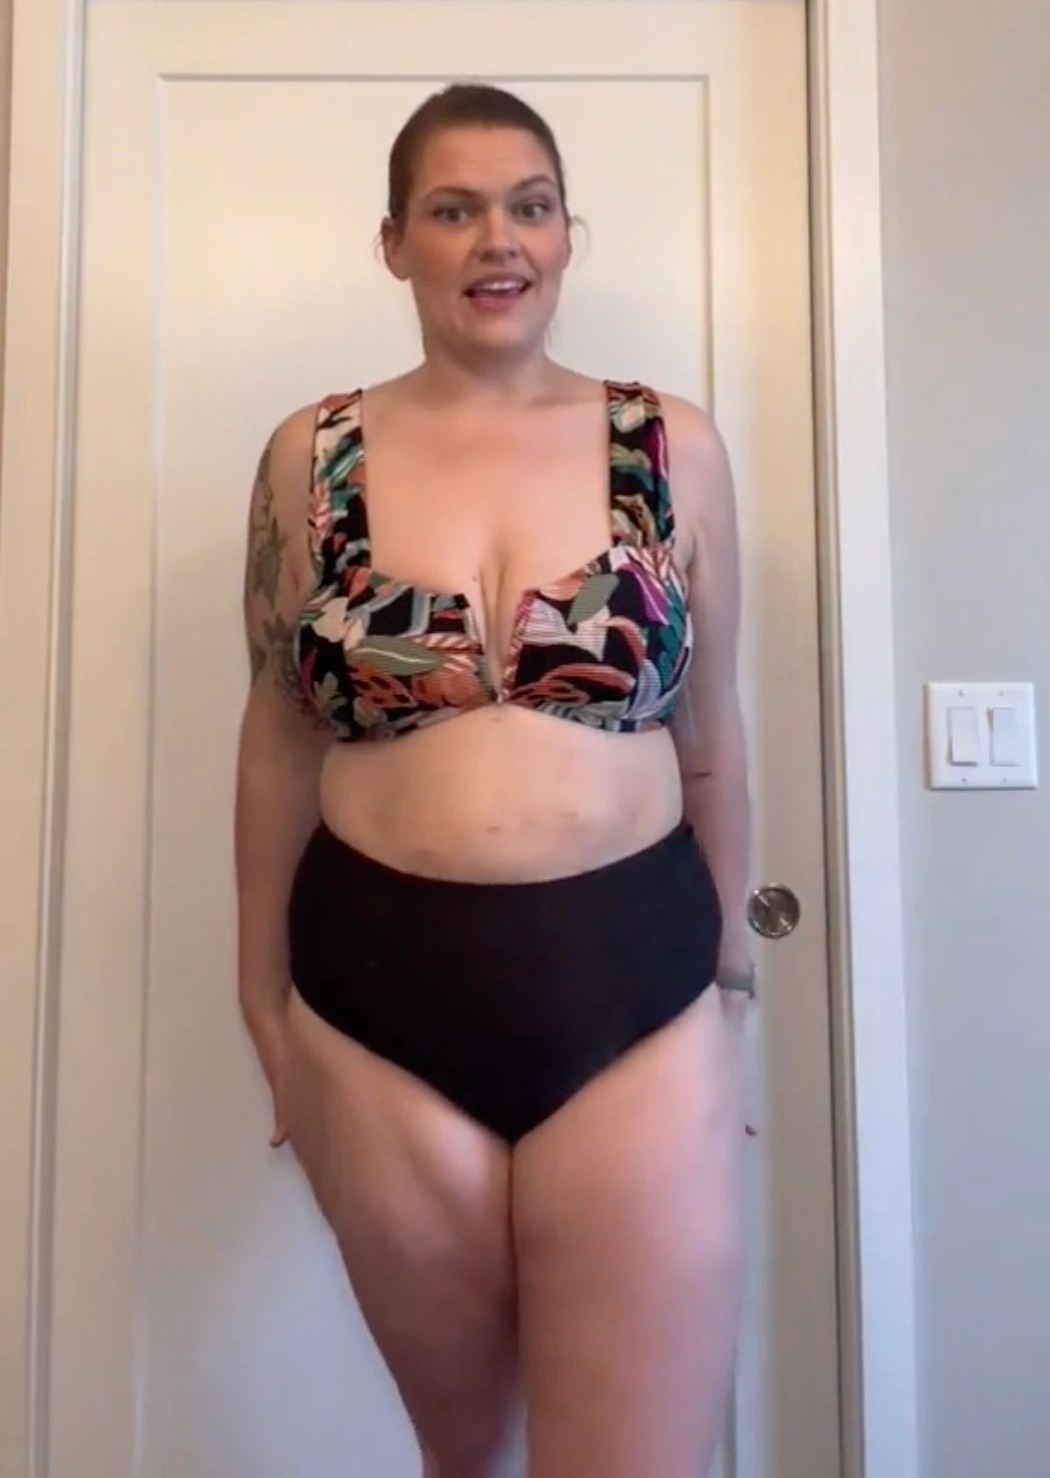 I’m a size 18 – I did a swimwear haul from Amazon & Old Navy, my boobs were ‘a little wonky’ in the green one-piece